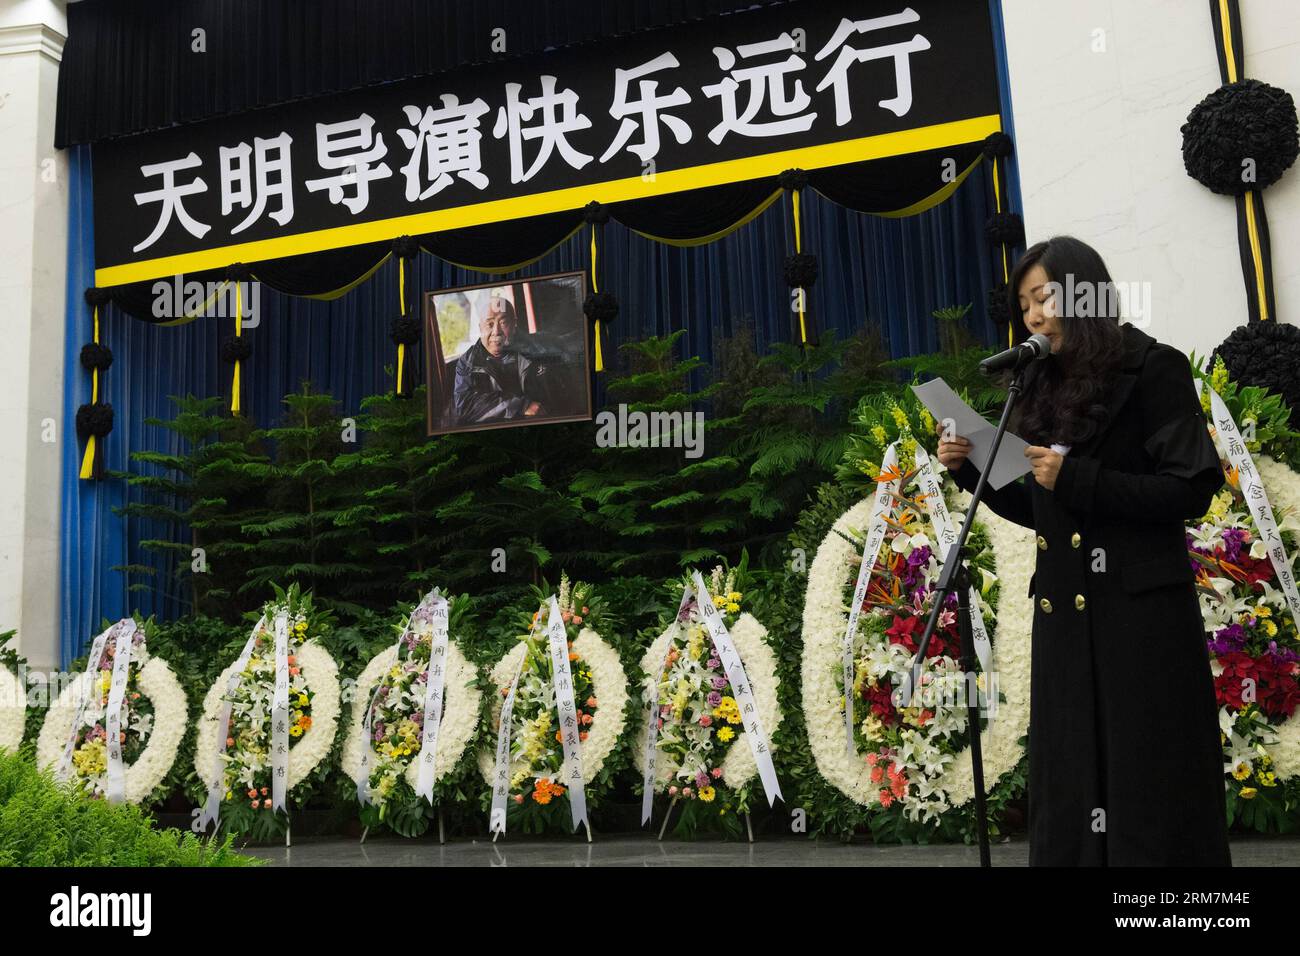 A memorial service for late film director Wu Tianming is held at the Babaoshan Funeral Home in Beijing, capital of China, March 8, 2014. Wu Tianming, who died of a heart attack on March 4 at the age of 75, was a leading figure of China s Fourth Generation film directors. While he was head of the renowned Xi an Film Studio, Wu spotted talents such as Zhang Yimou and Gu Changwei who later became representatives of China s Fifth Generation film directors. His major works include Old Well and Life . (Xinhua/Wu Kaixiang) (lmm) CHINA-BEIJING-FILM DIRECTOR-WU TIANMING-MEMORIAL SERVICE (CN) PUBLICATIO Stock Photo